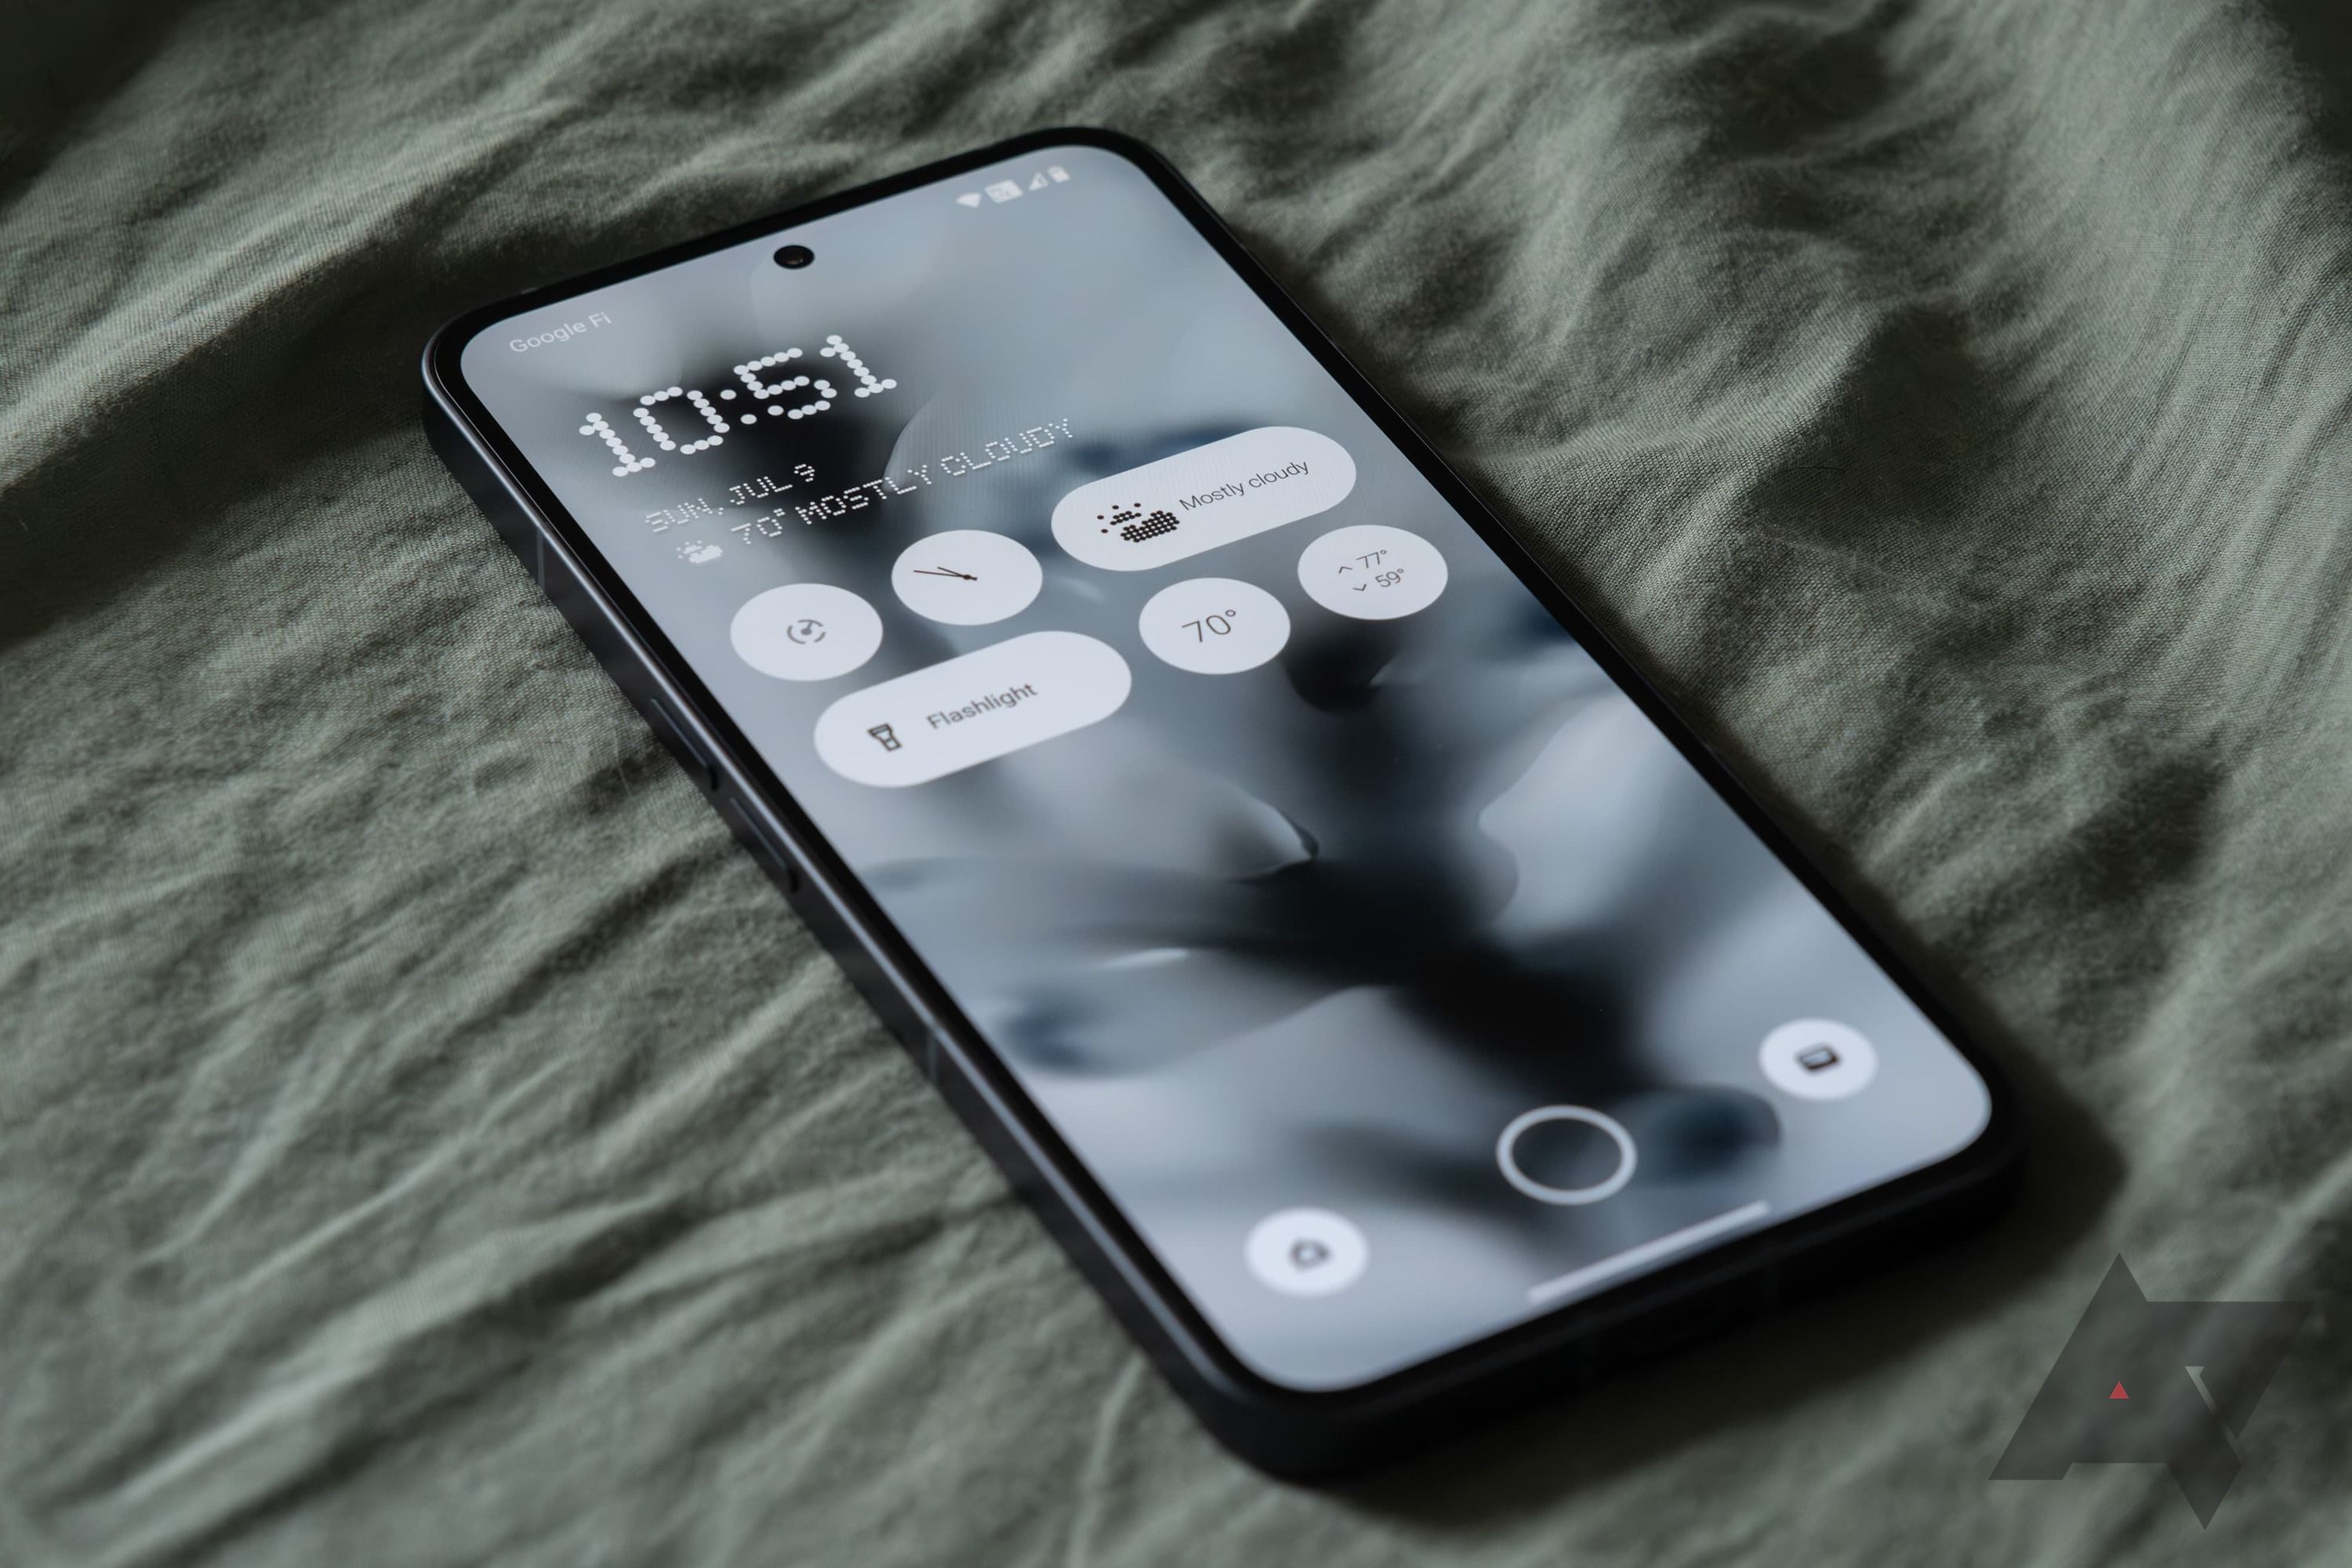 The Nothing Phone 2 showing the lock screen widgets